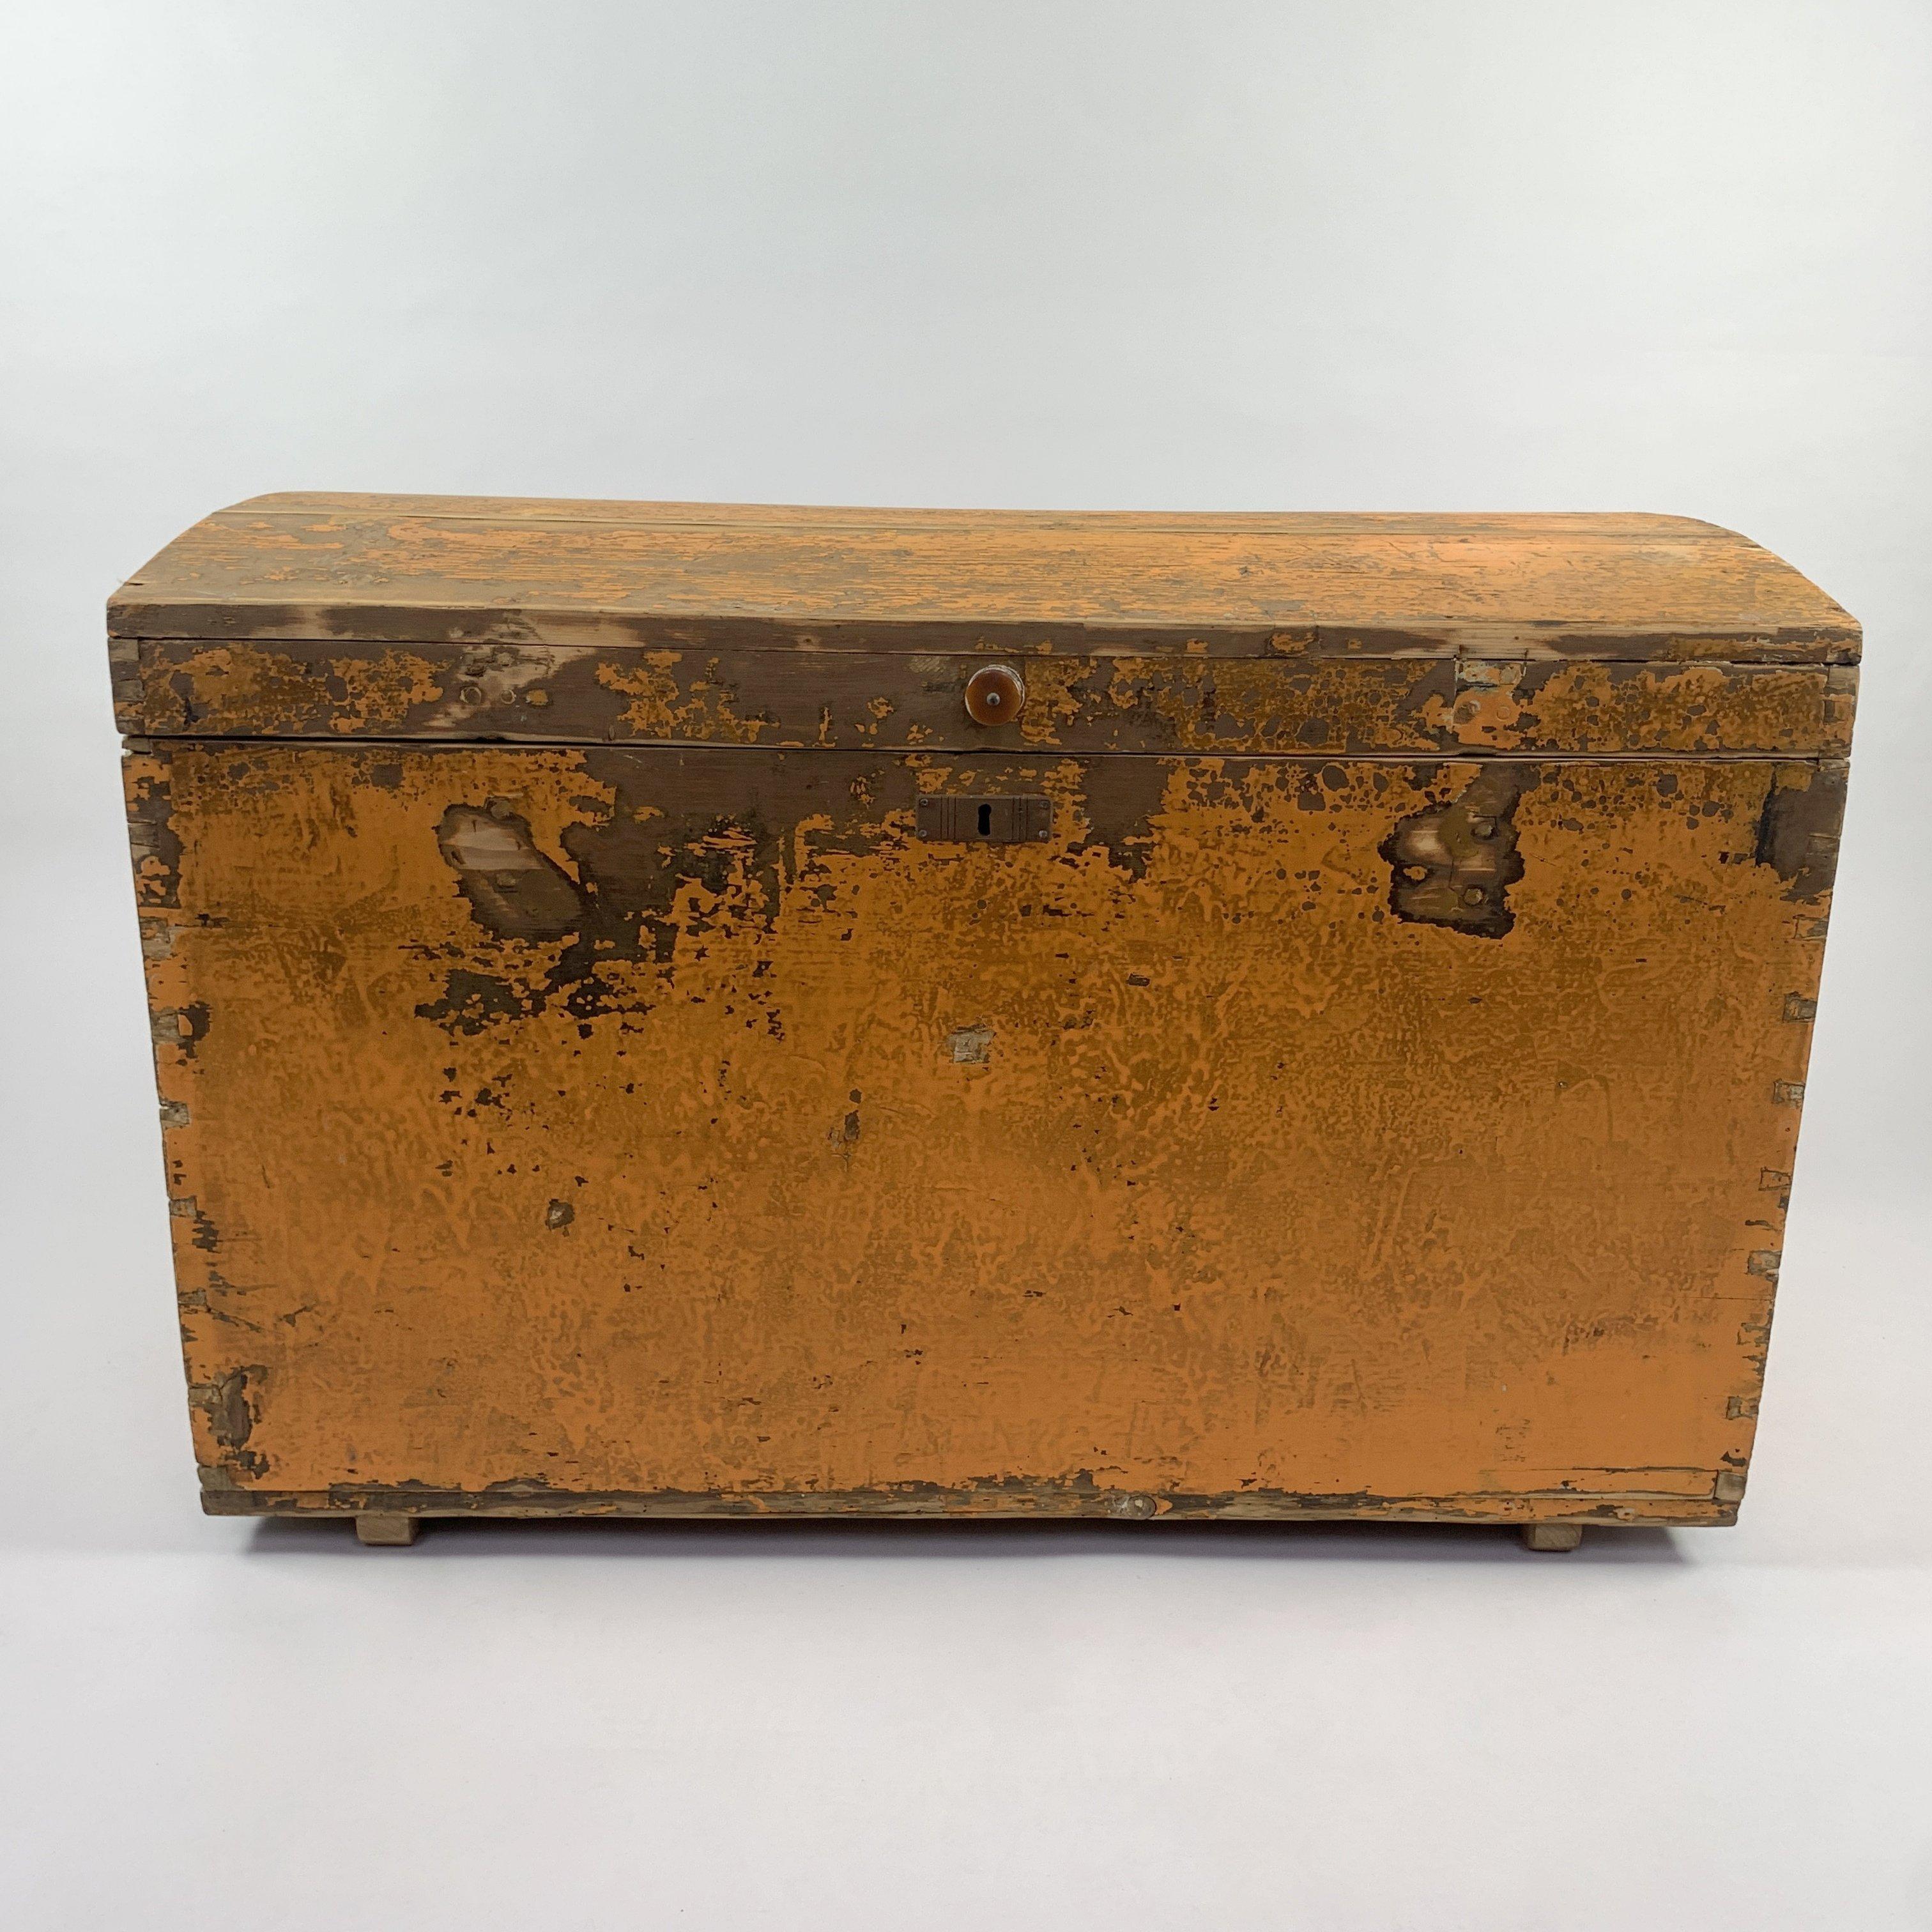 19th century antique wooden chest or floor trunk.